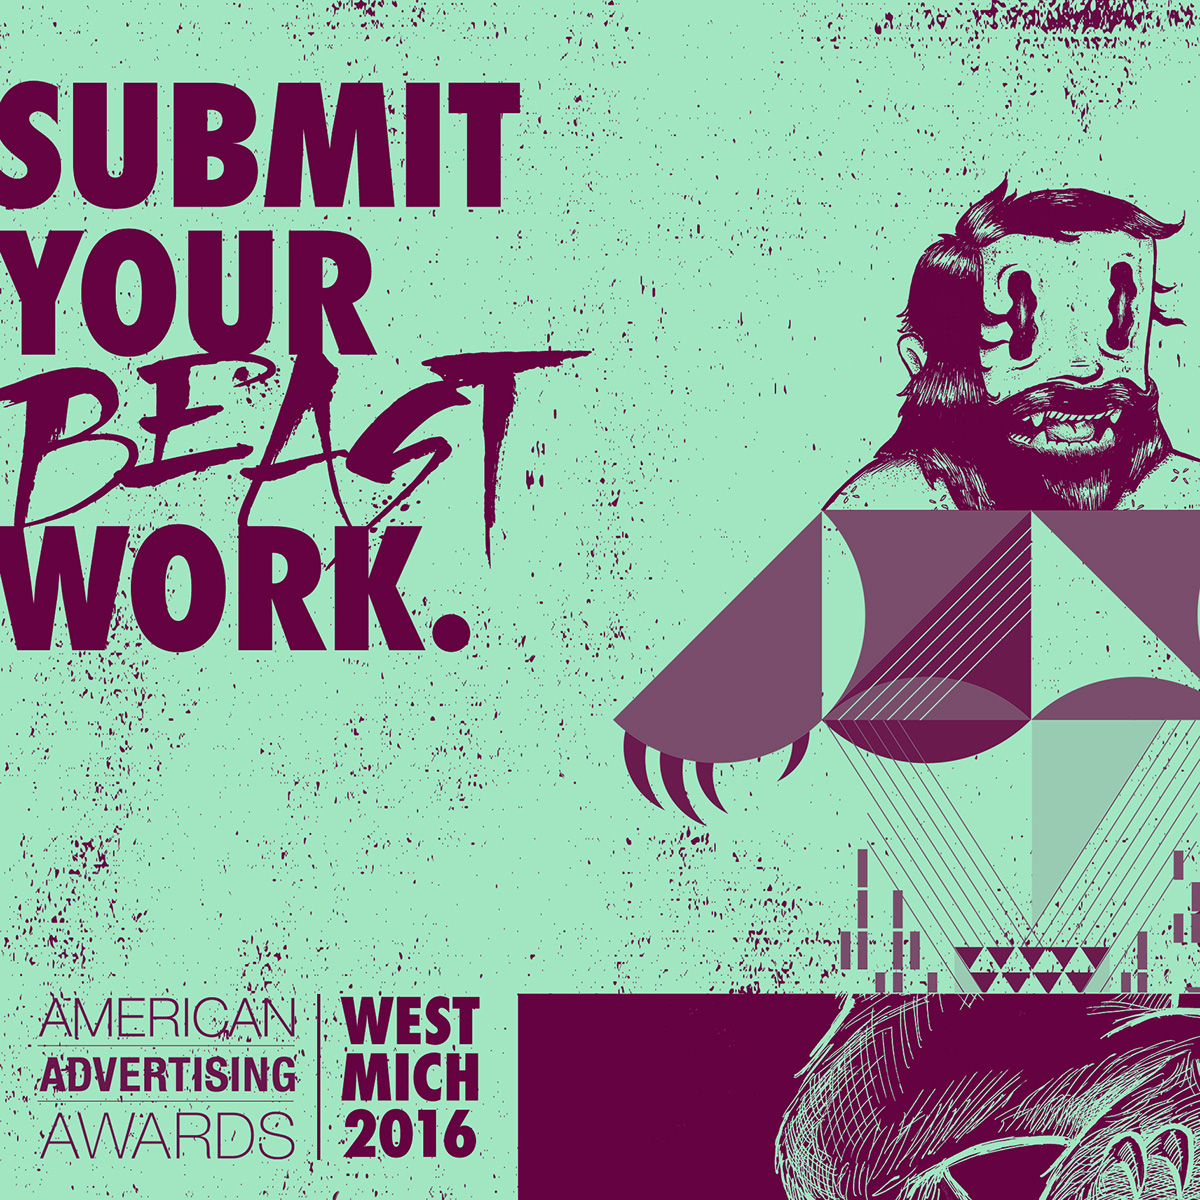 American Advertising Awards award show Addys AAF American Advertising Federation west michigan ad campaign beast monsters collage